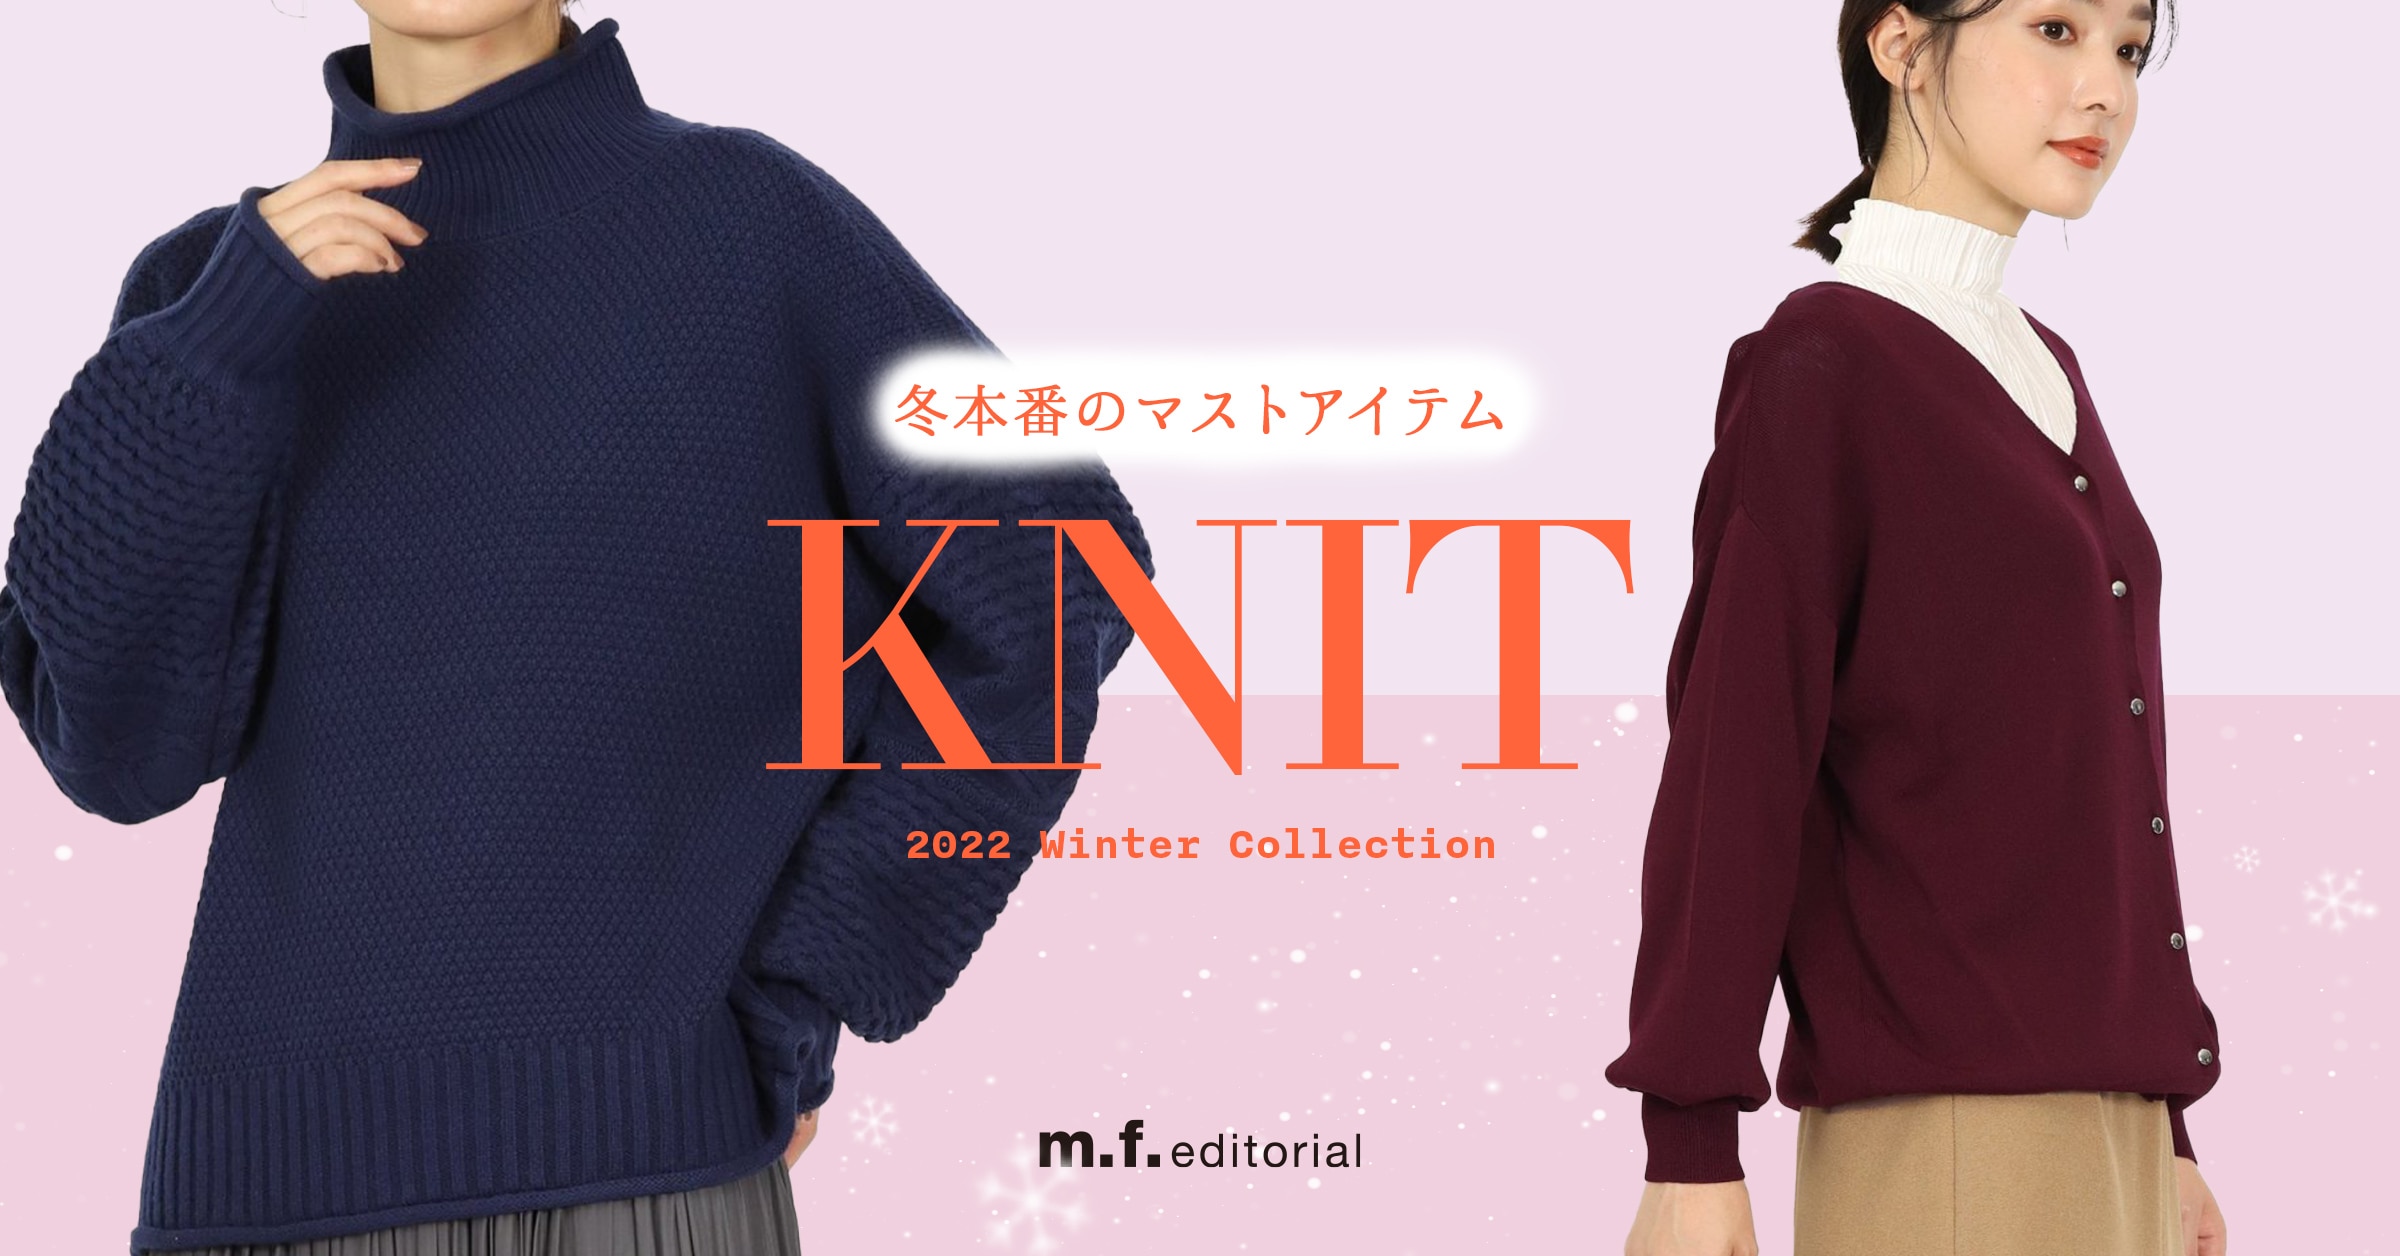 KNIT COLLECTION